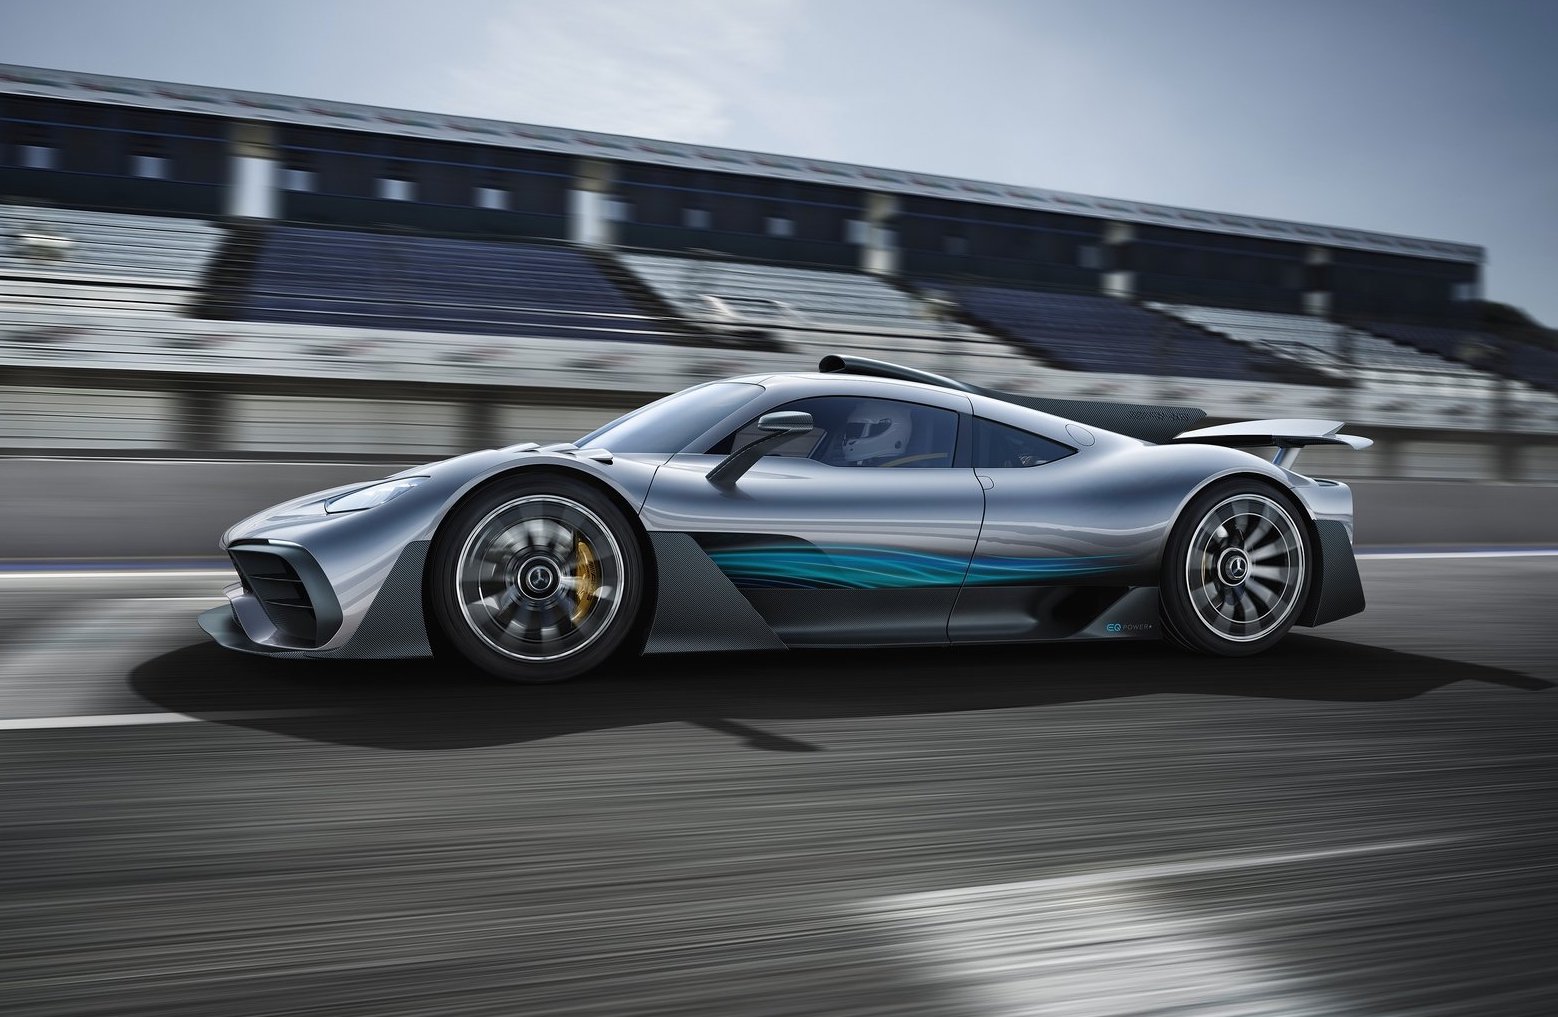 Mercedes-AMG One production to finally start in 2022 – report